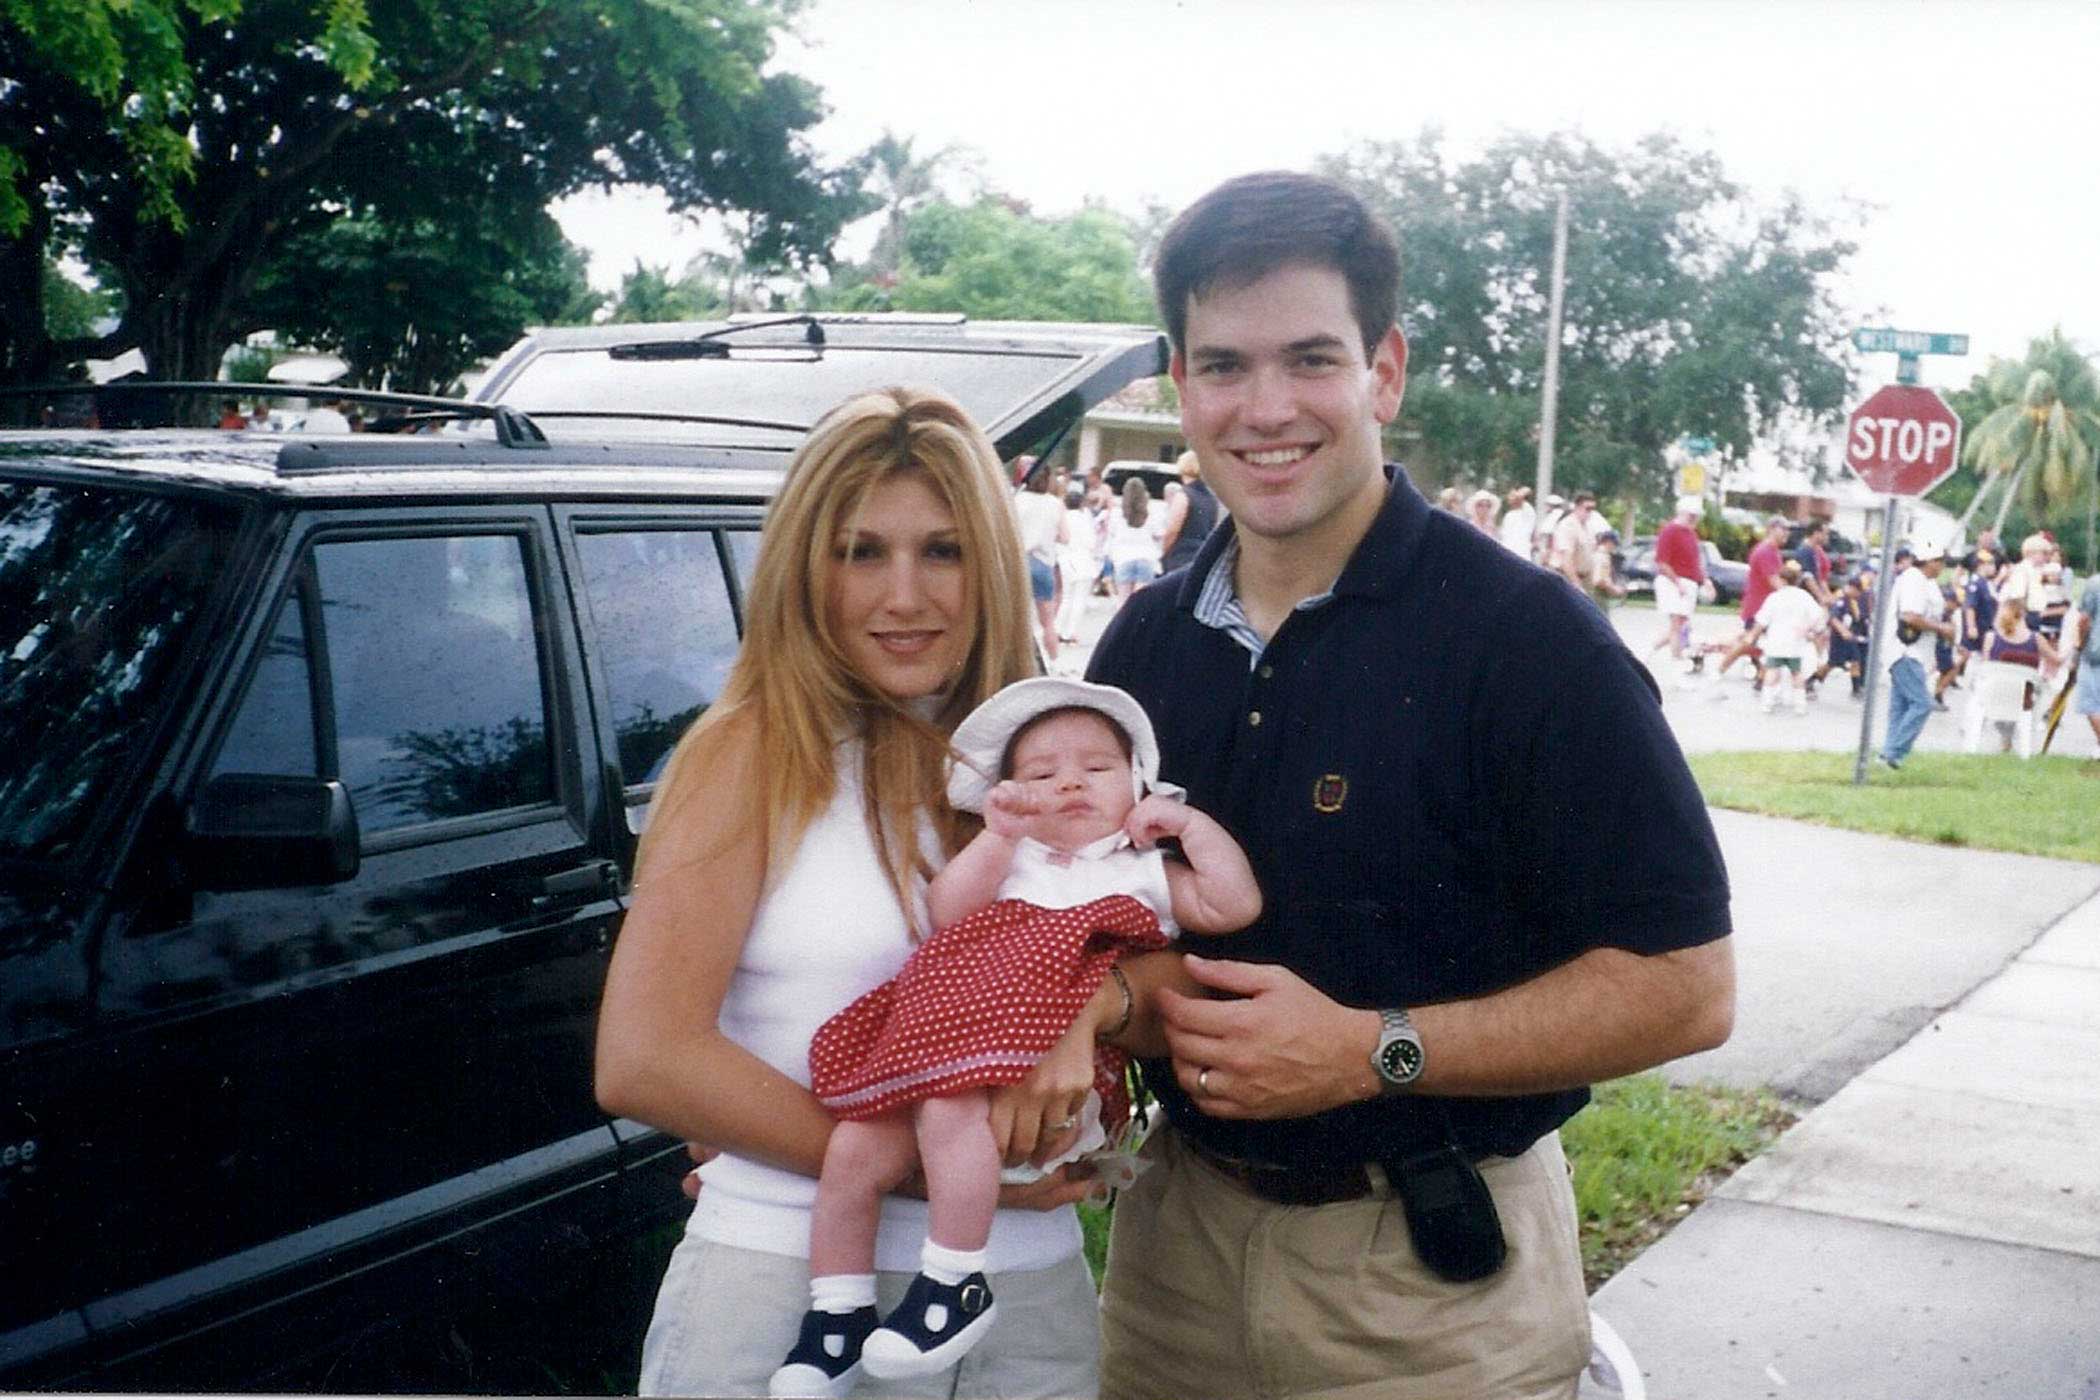 Jeanette Rubio and Marco Rubio holding their youngest child Amanda Rubio in 2000.